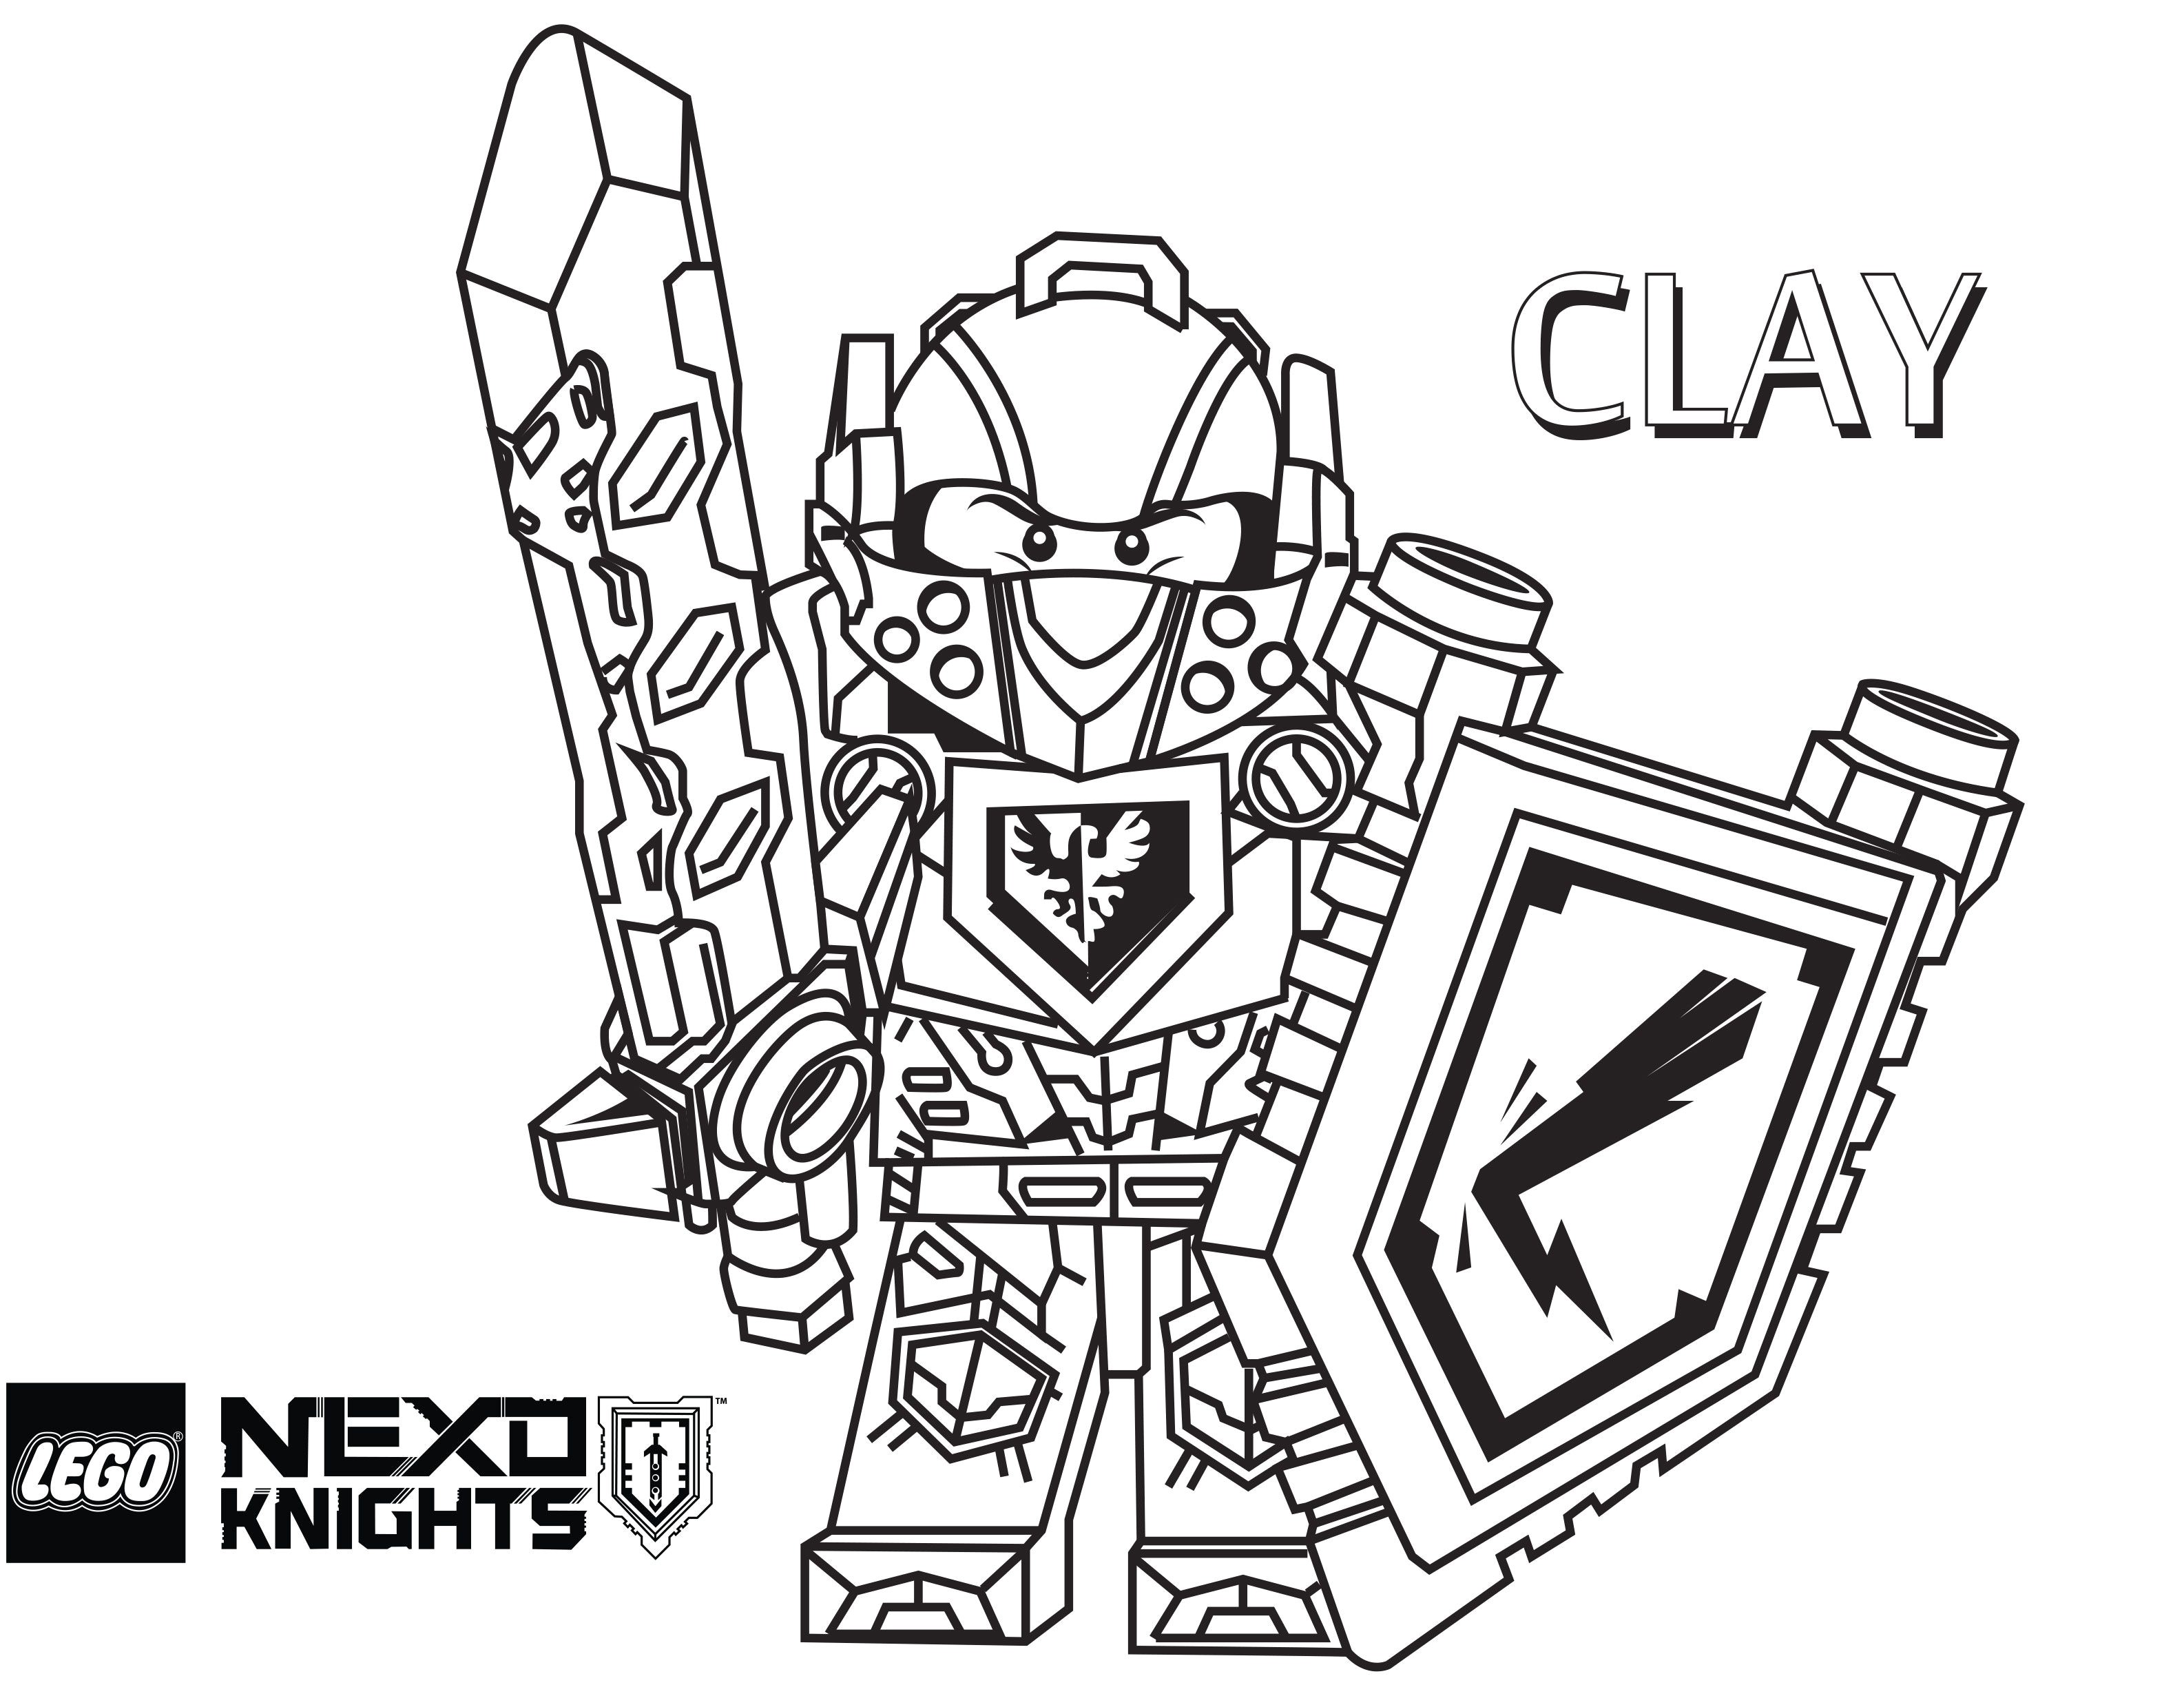 Lego Nexo Knights Coloring Pages Free Printable Lego Nexo Knights Coloriage Lego Nexo Knights · 